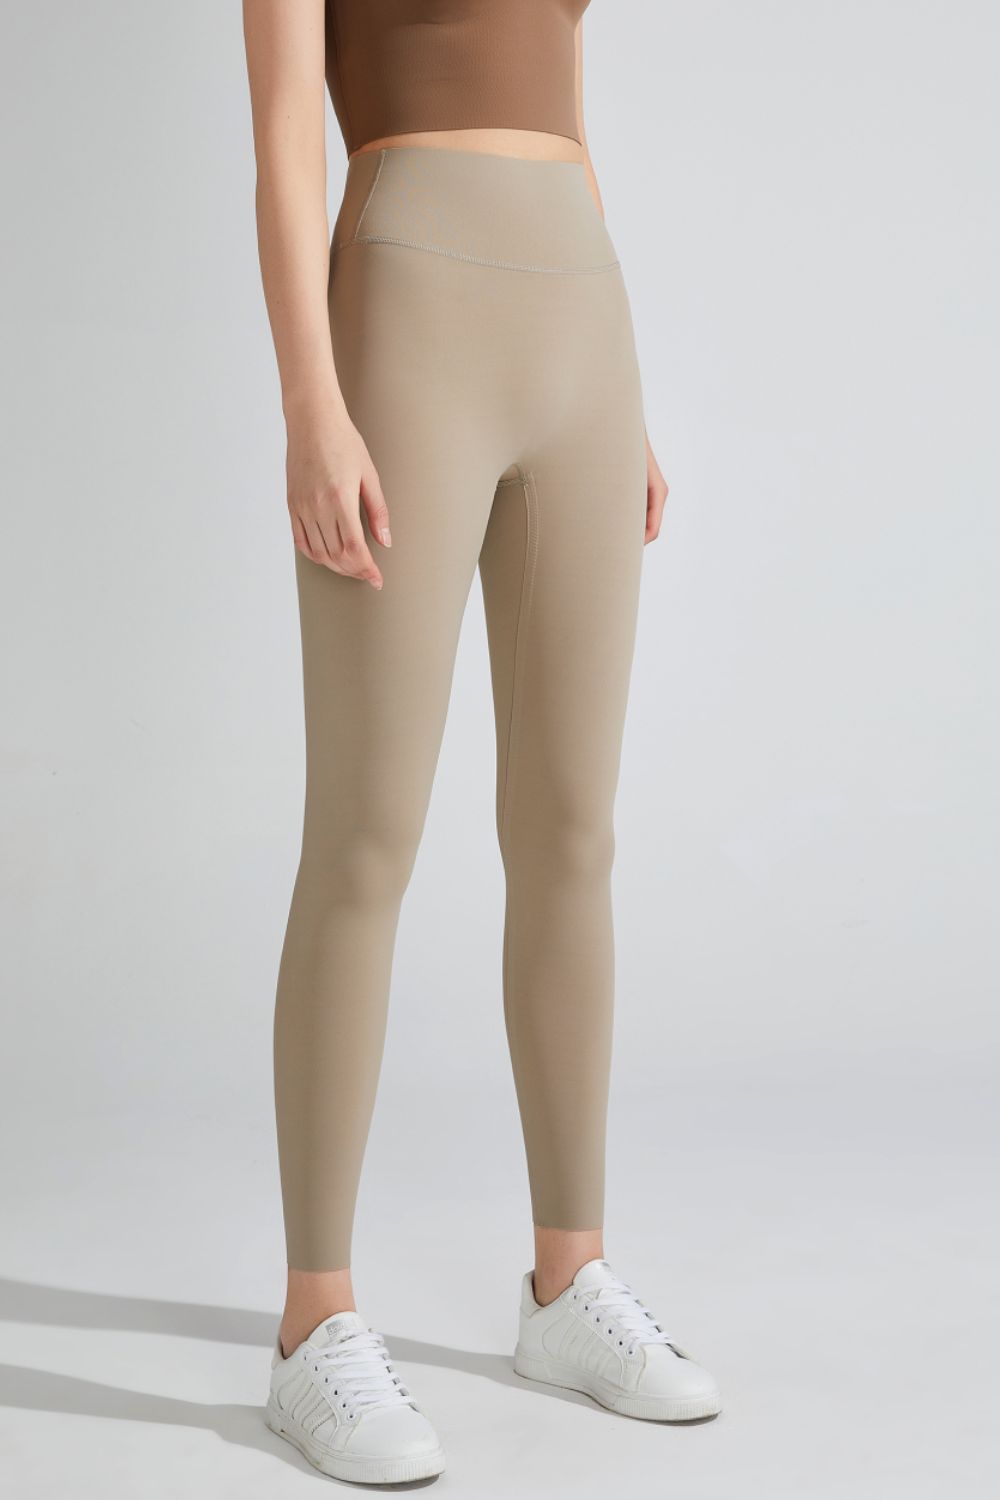 High Waist Breathable Sports Leggings - Light Brown / S - Women’s Clothing & Accessories - Pants - 10 - 2024